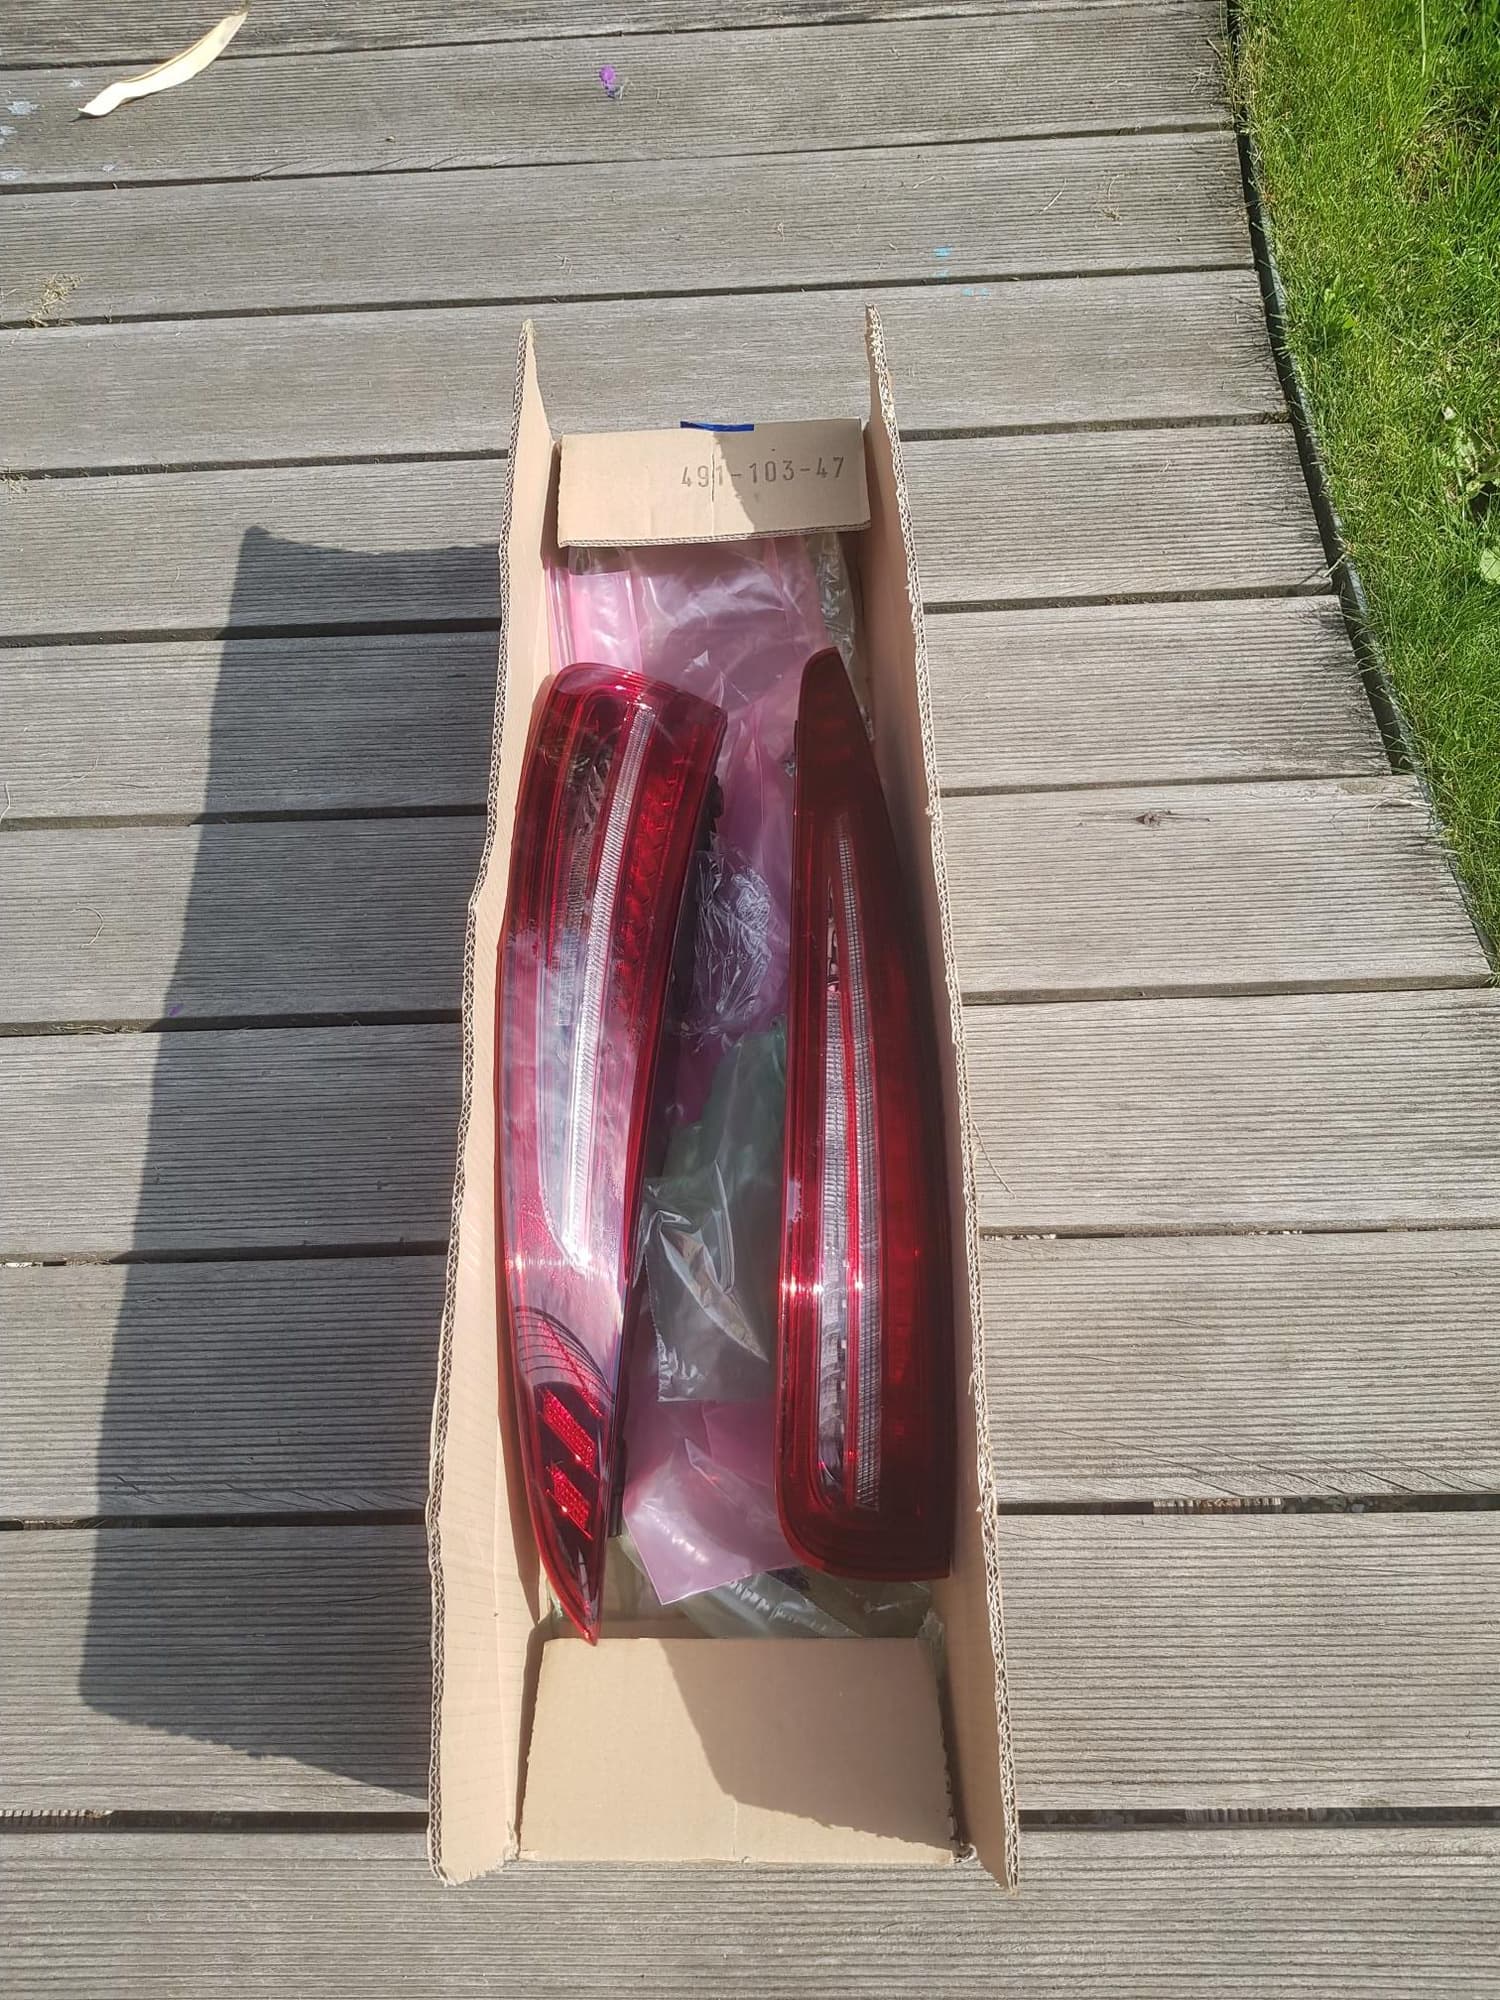 Lights - Global LHD (excl. US) OEM 991.1 Red Rear Tail Light Set - Used - 2012 to 2016 Porsche 911 - Egg Bei Zurich, Switzerland